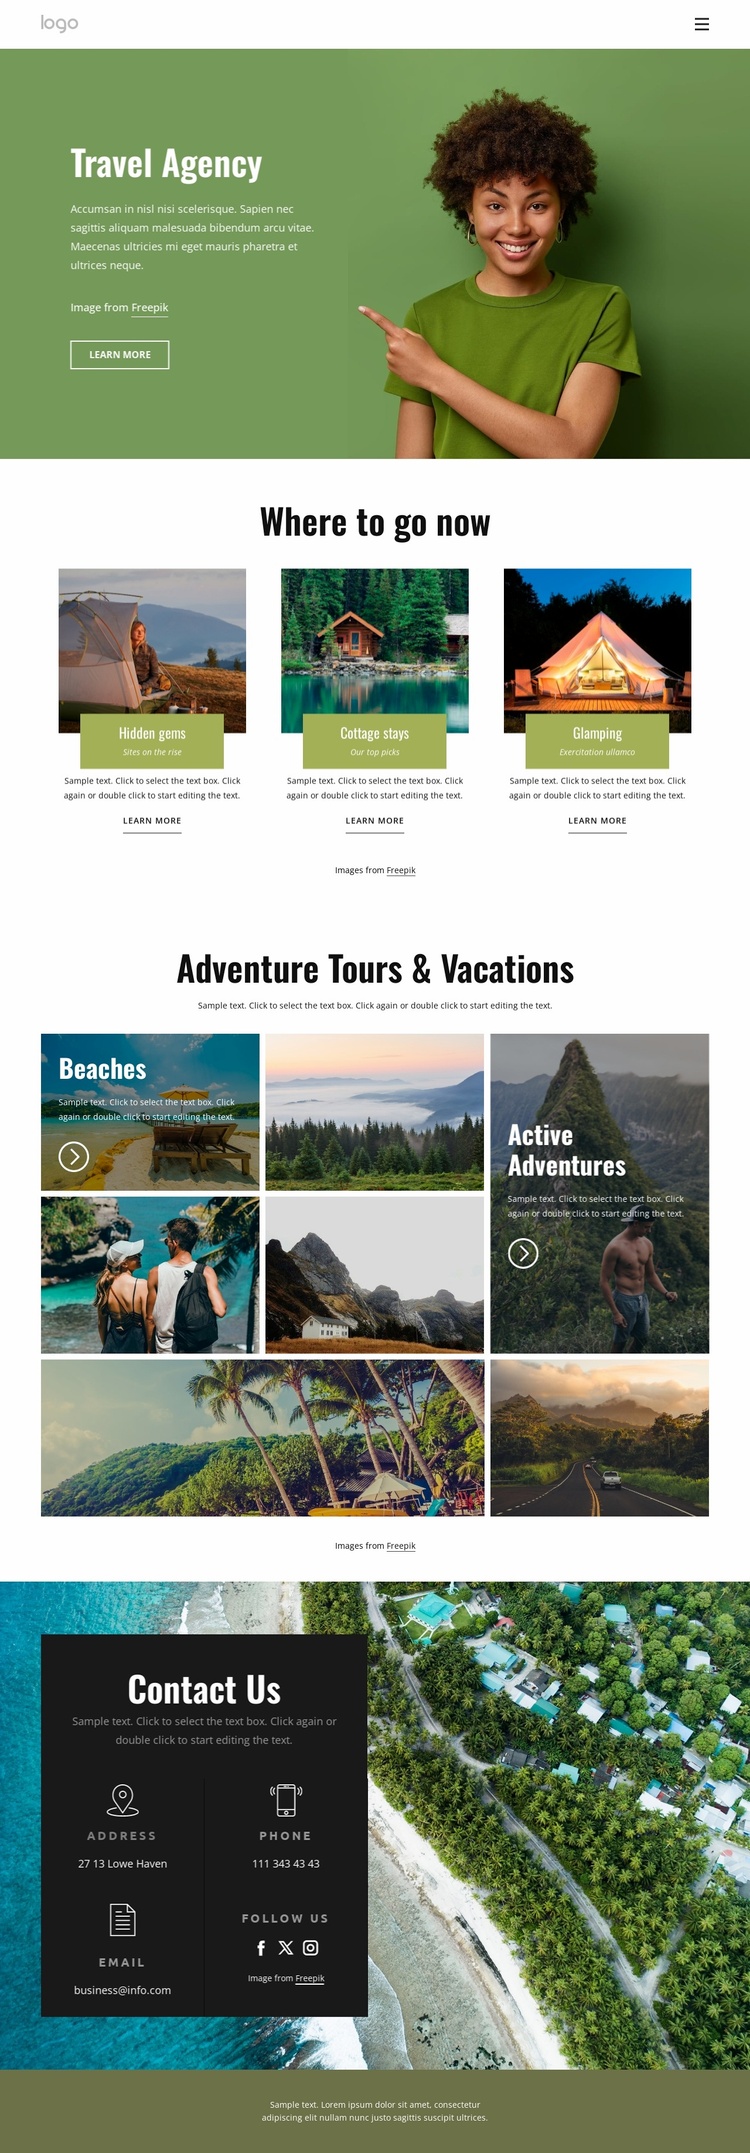 Adventure tours and vacations Ecommerce Website Design